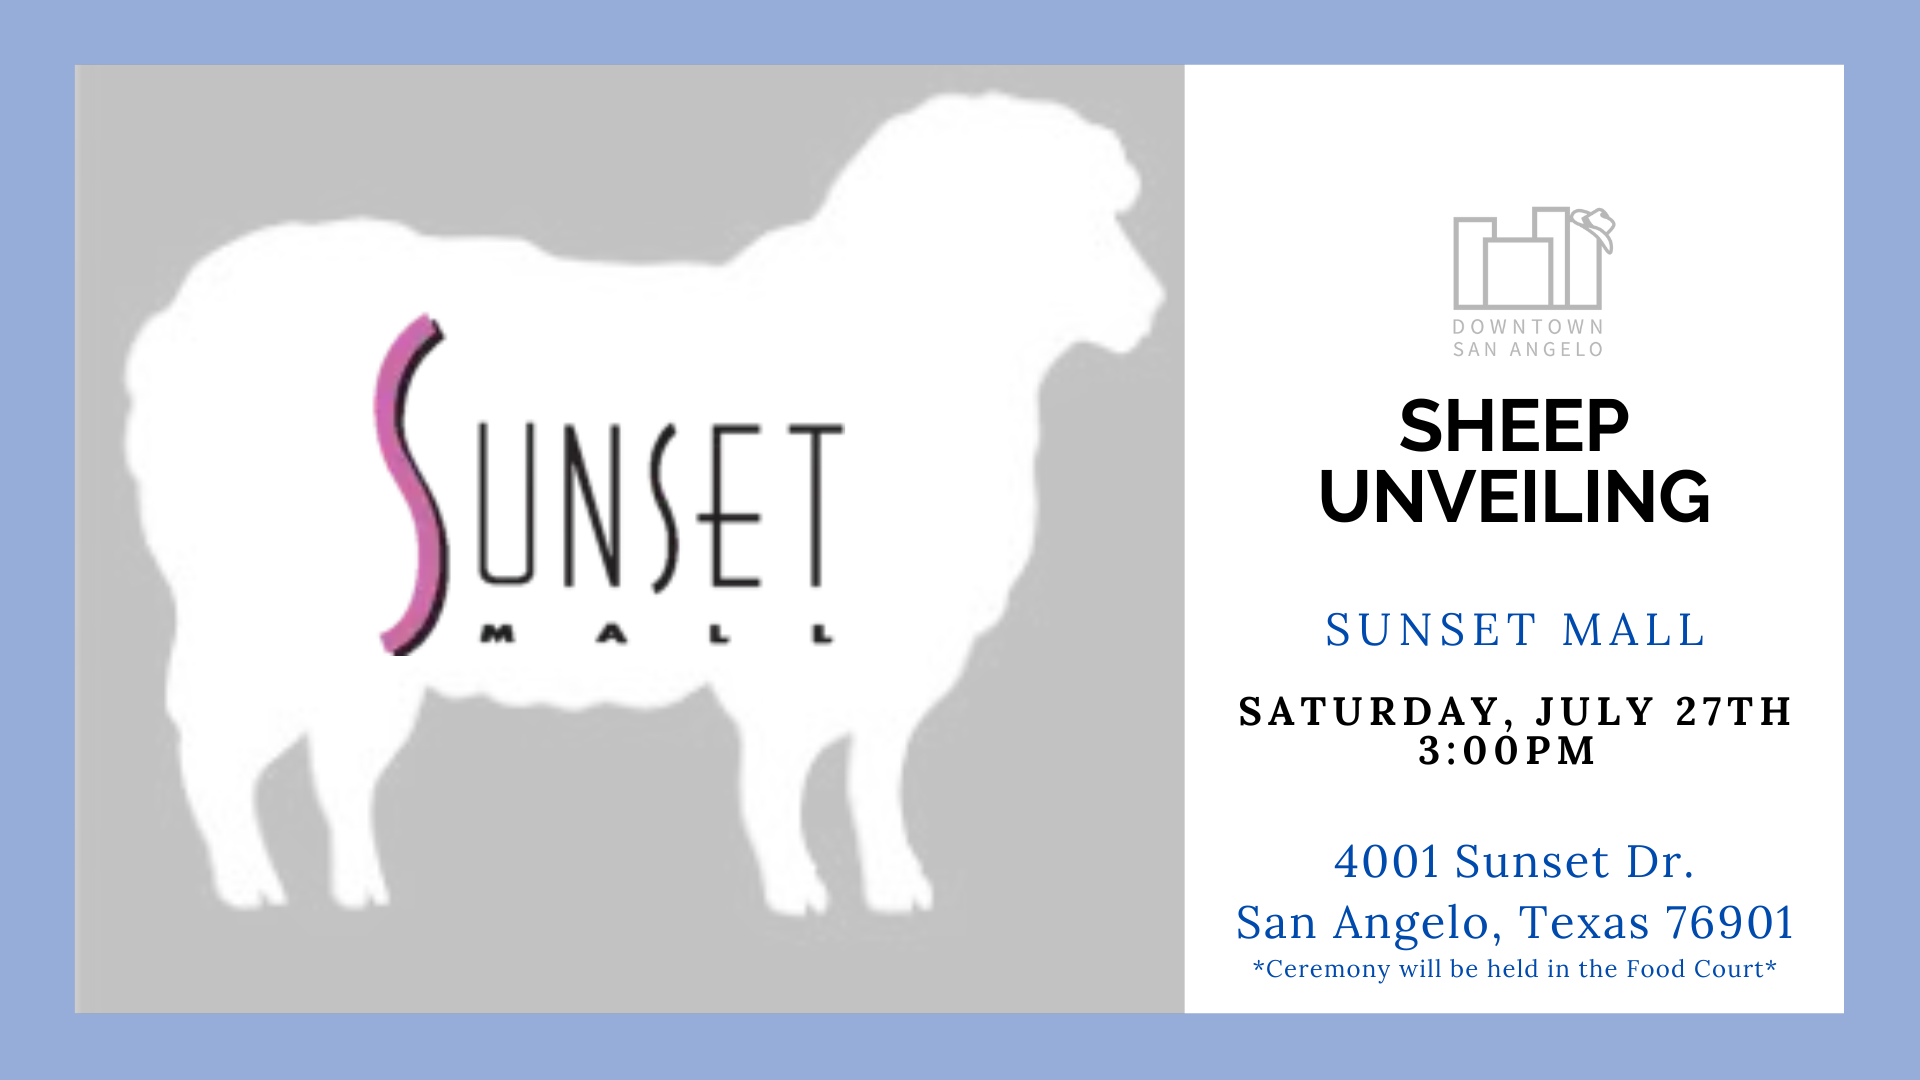 Sunset Mall sheep unveiling